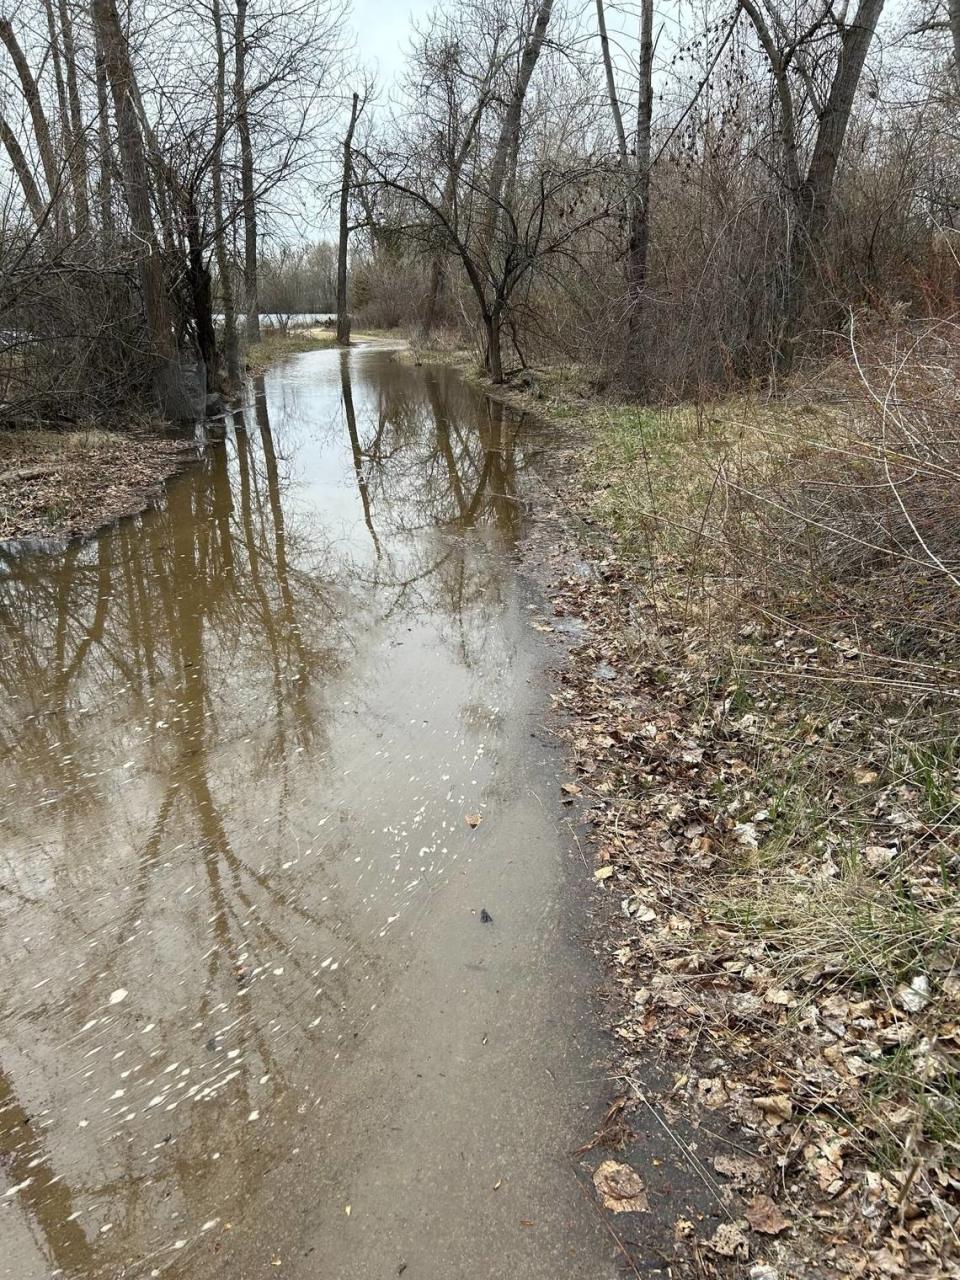 The Bethine Church River Trail, a 1.6-mile unpaved stretch of the Boise River Greenbelt, has experienced flooding throughout the spring.